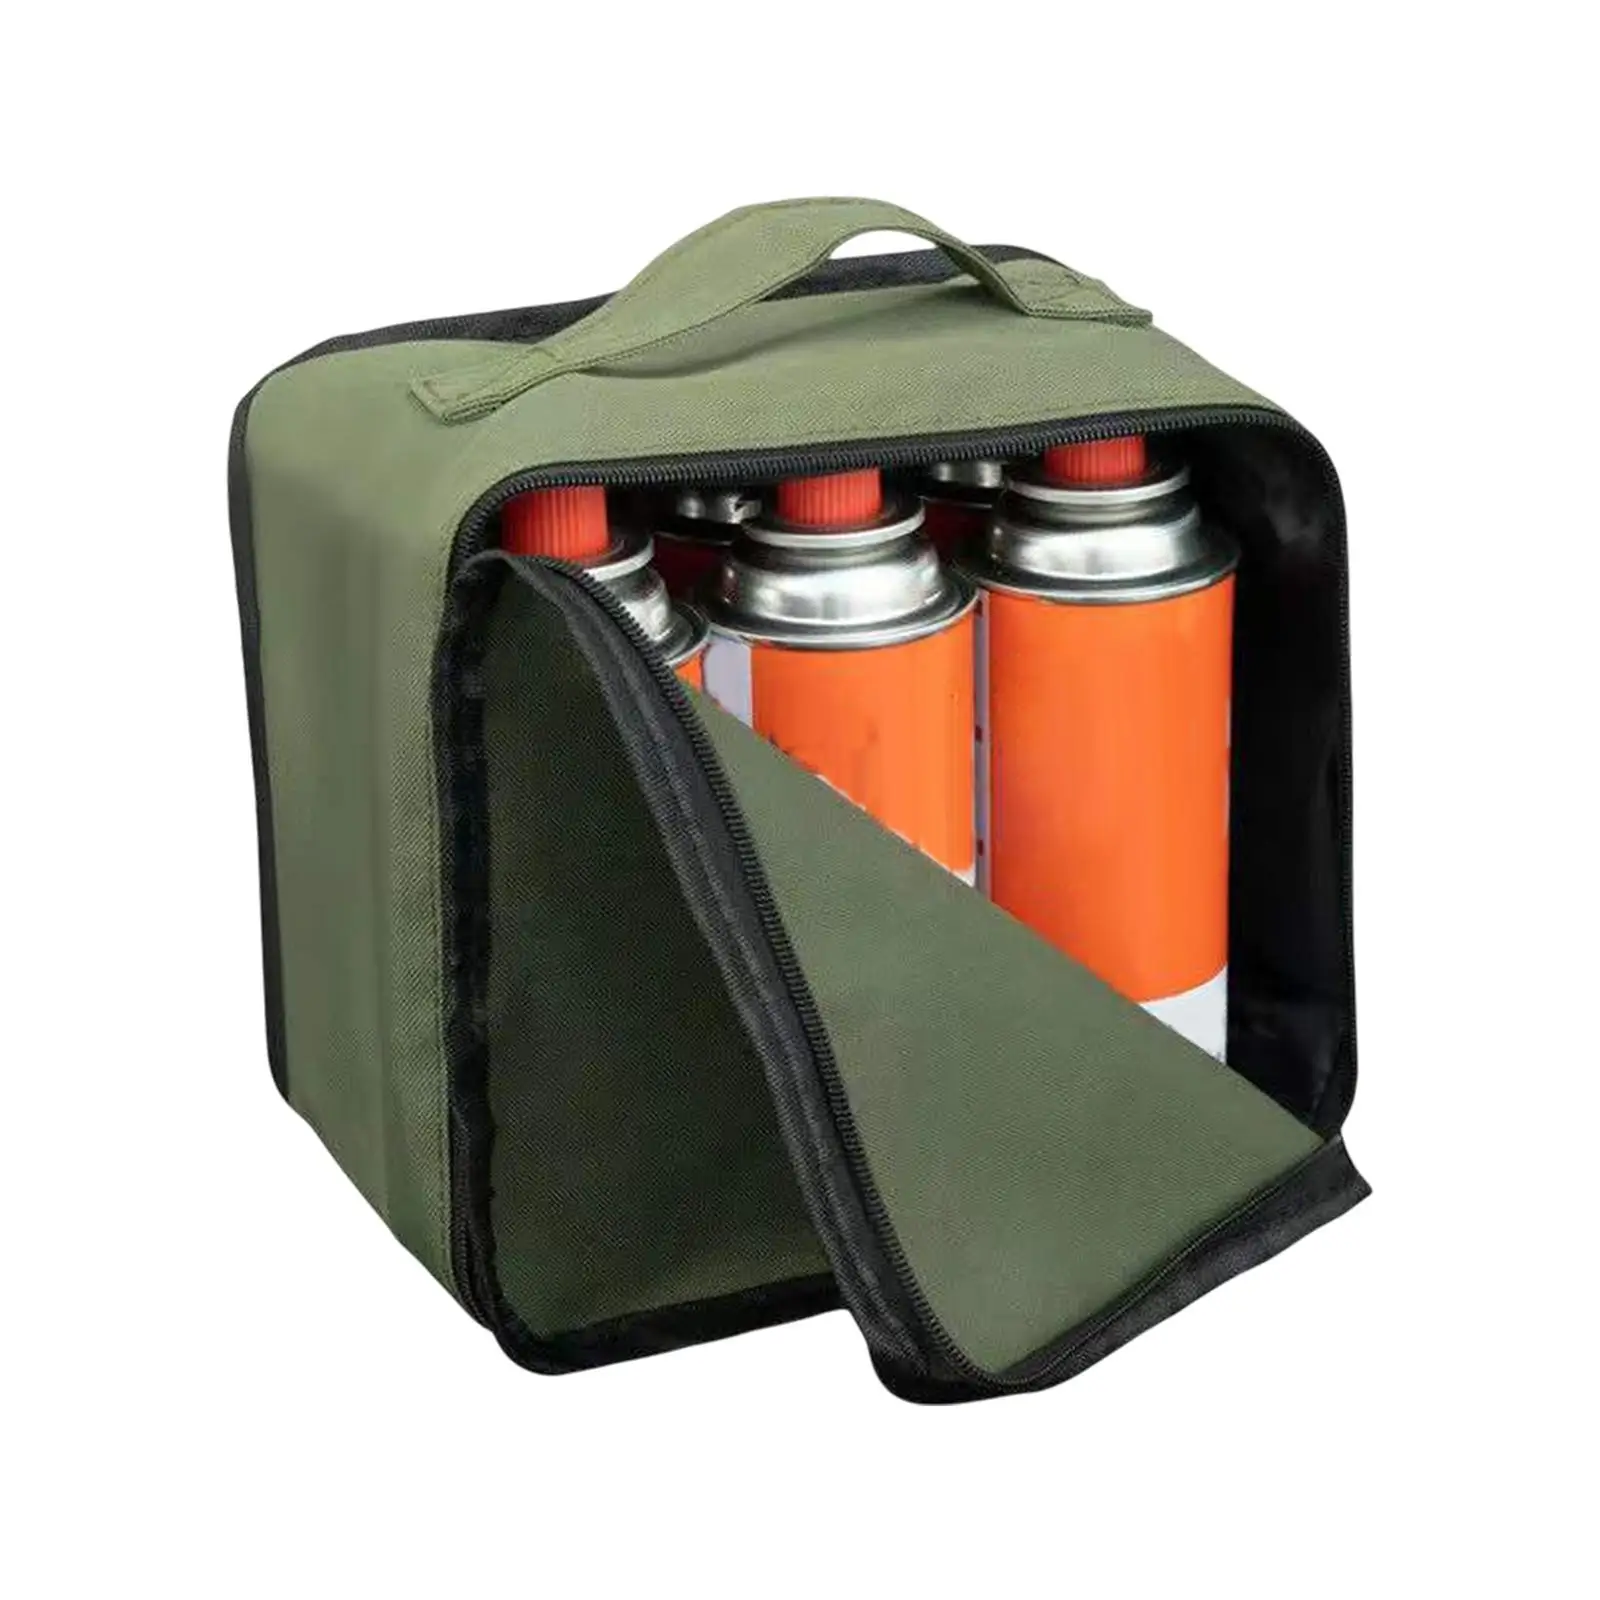 Gas Tank Storage Bags Large Capacity Easy to Carry Convenient Wear Resistant Durable Gas Canister Bag for Camping Kitchen Travel